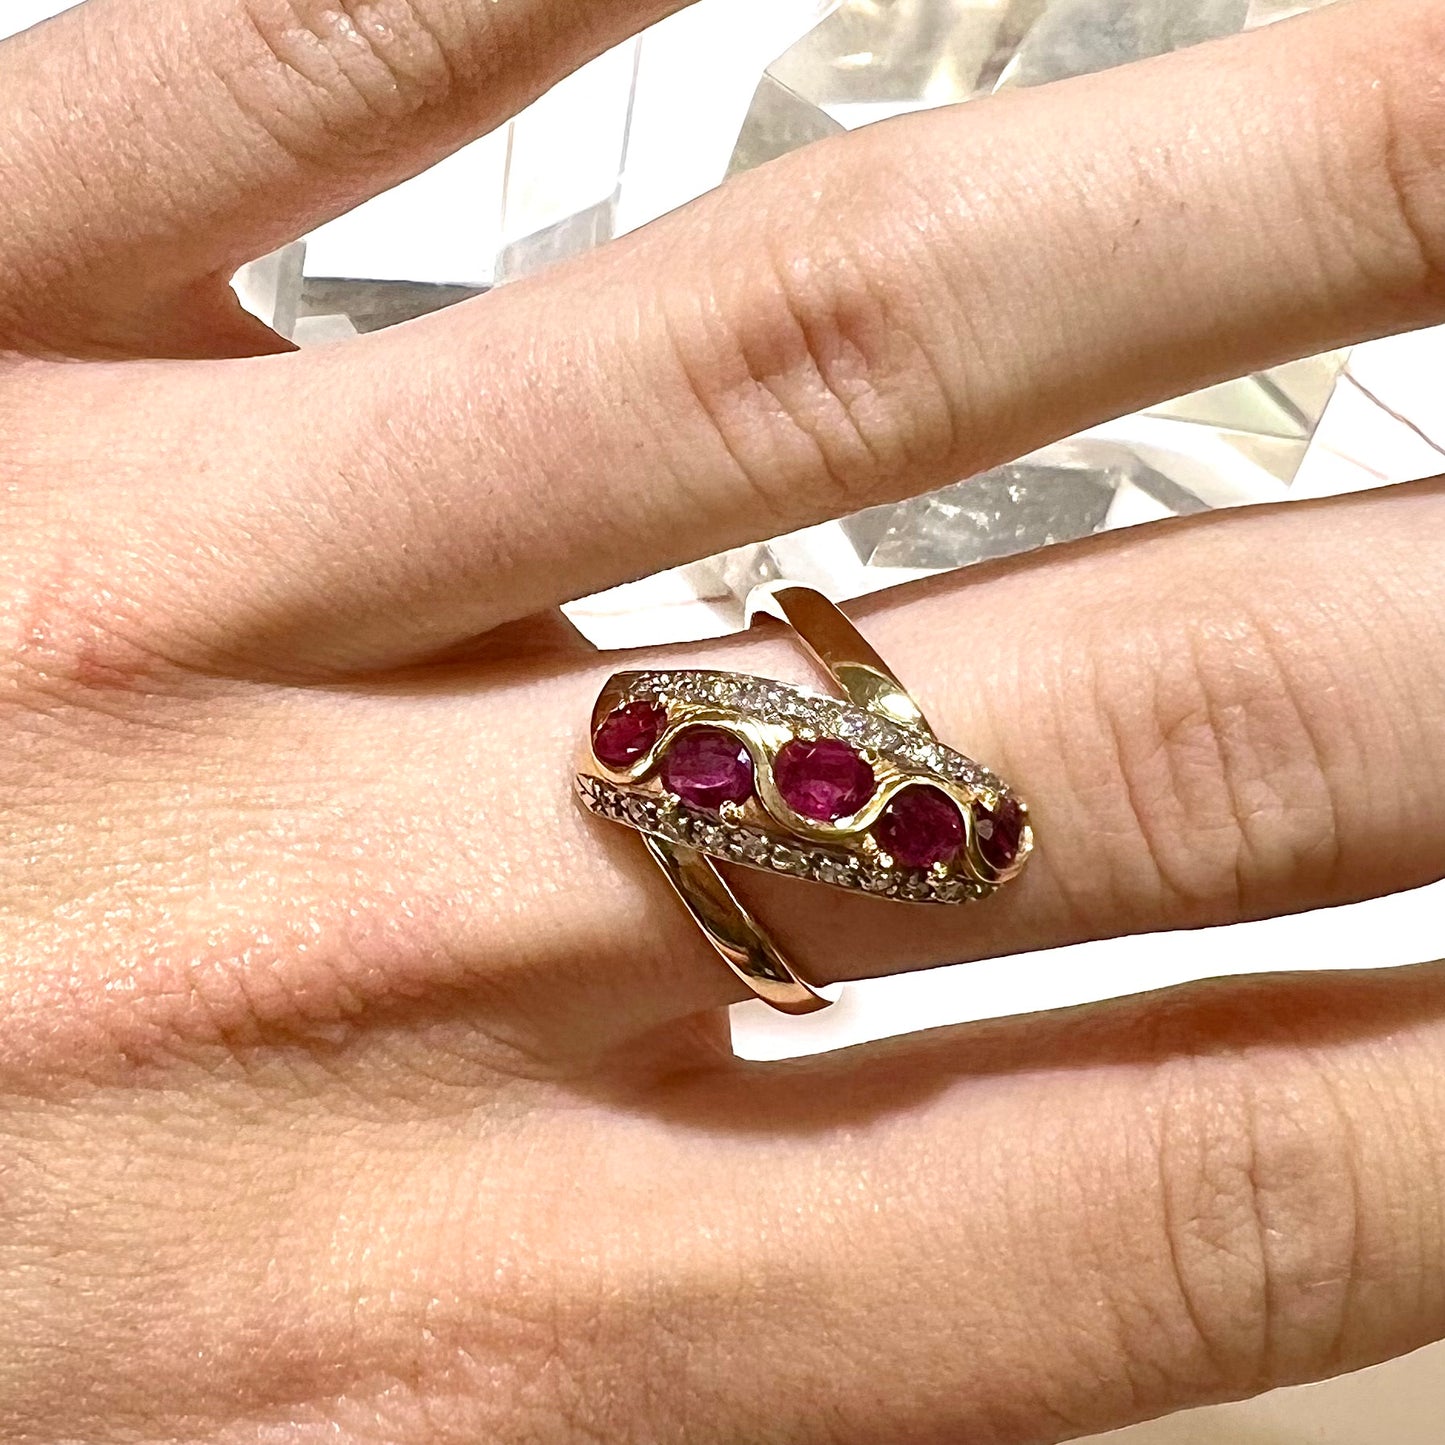 A custom freeform design yellow gold twisted shank ring set with five oval cut rubies and small round diamonds.